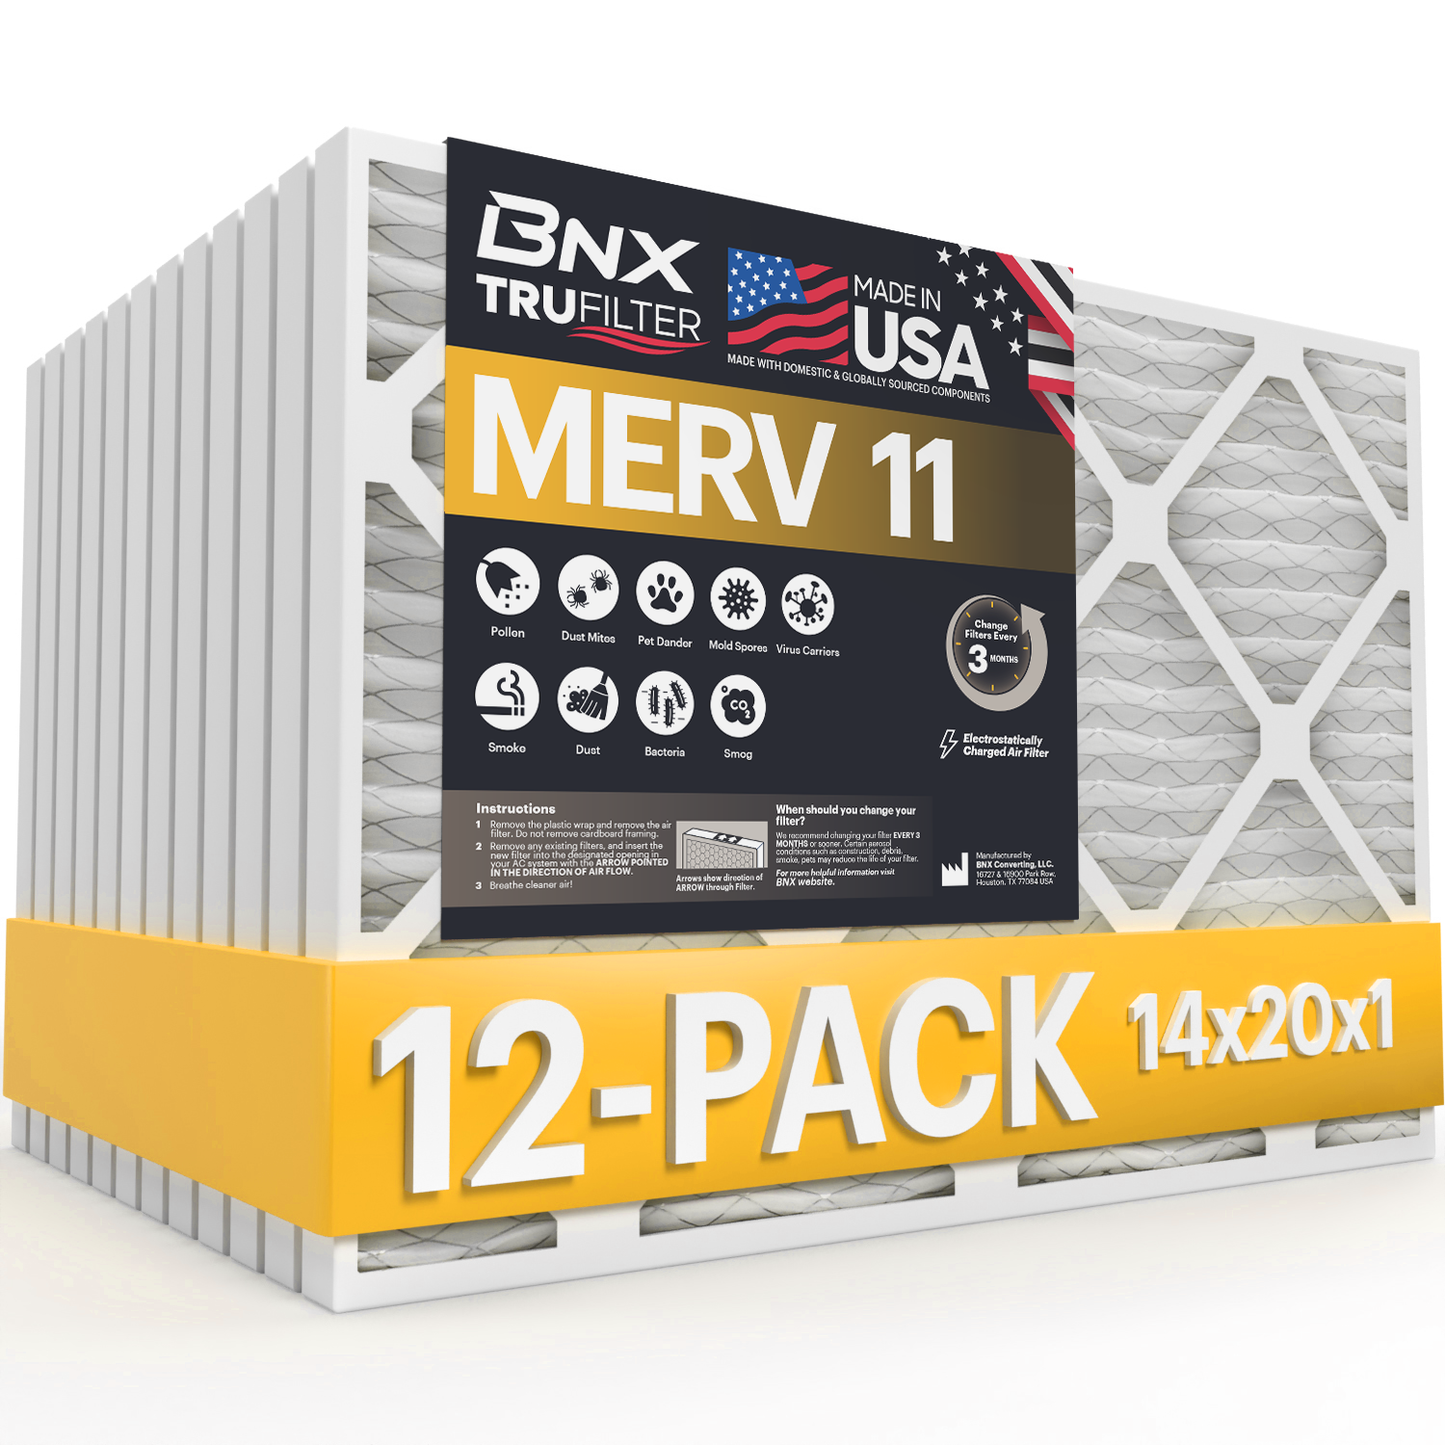 BNX TruFilter 14x20x1 Air Filter MERV 11 (12-Pack) - MADE IN USA - Allergen Defense Electrostatic Pleated Air Conditioner HVAC AC Furnace Filters for Allergies, Dust, Pet, Smoke, Allergy MPR 1200 FPR 7